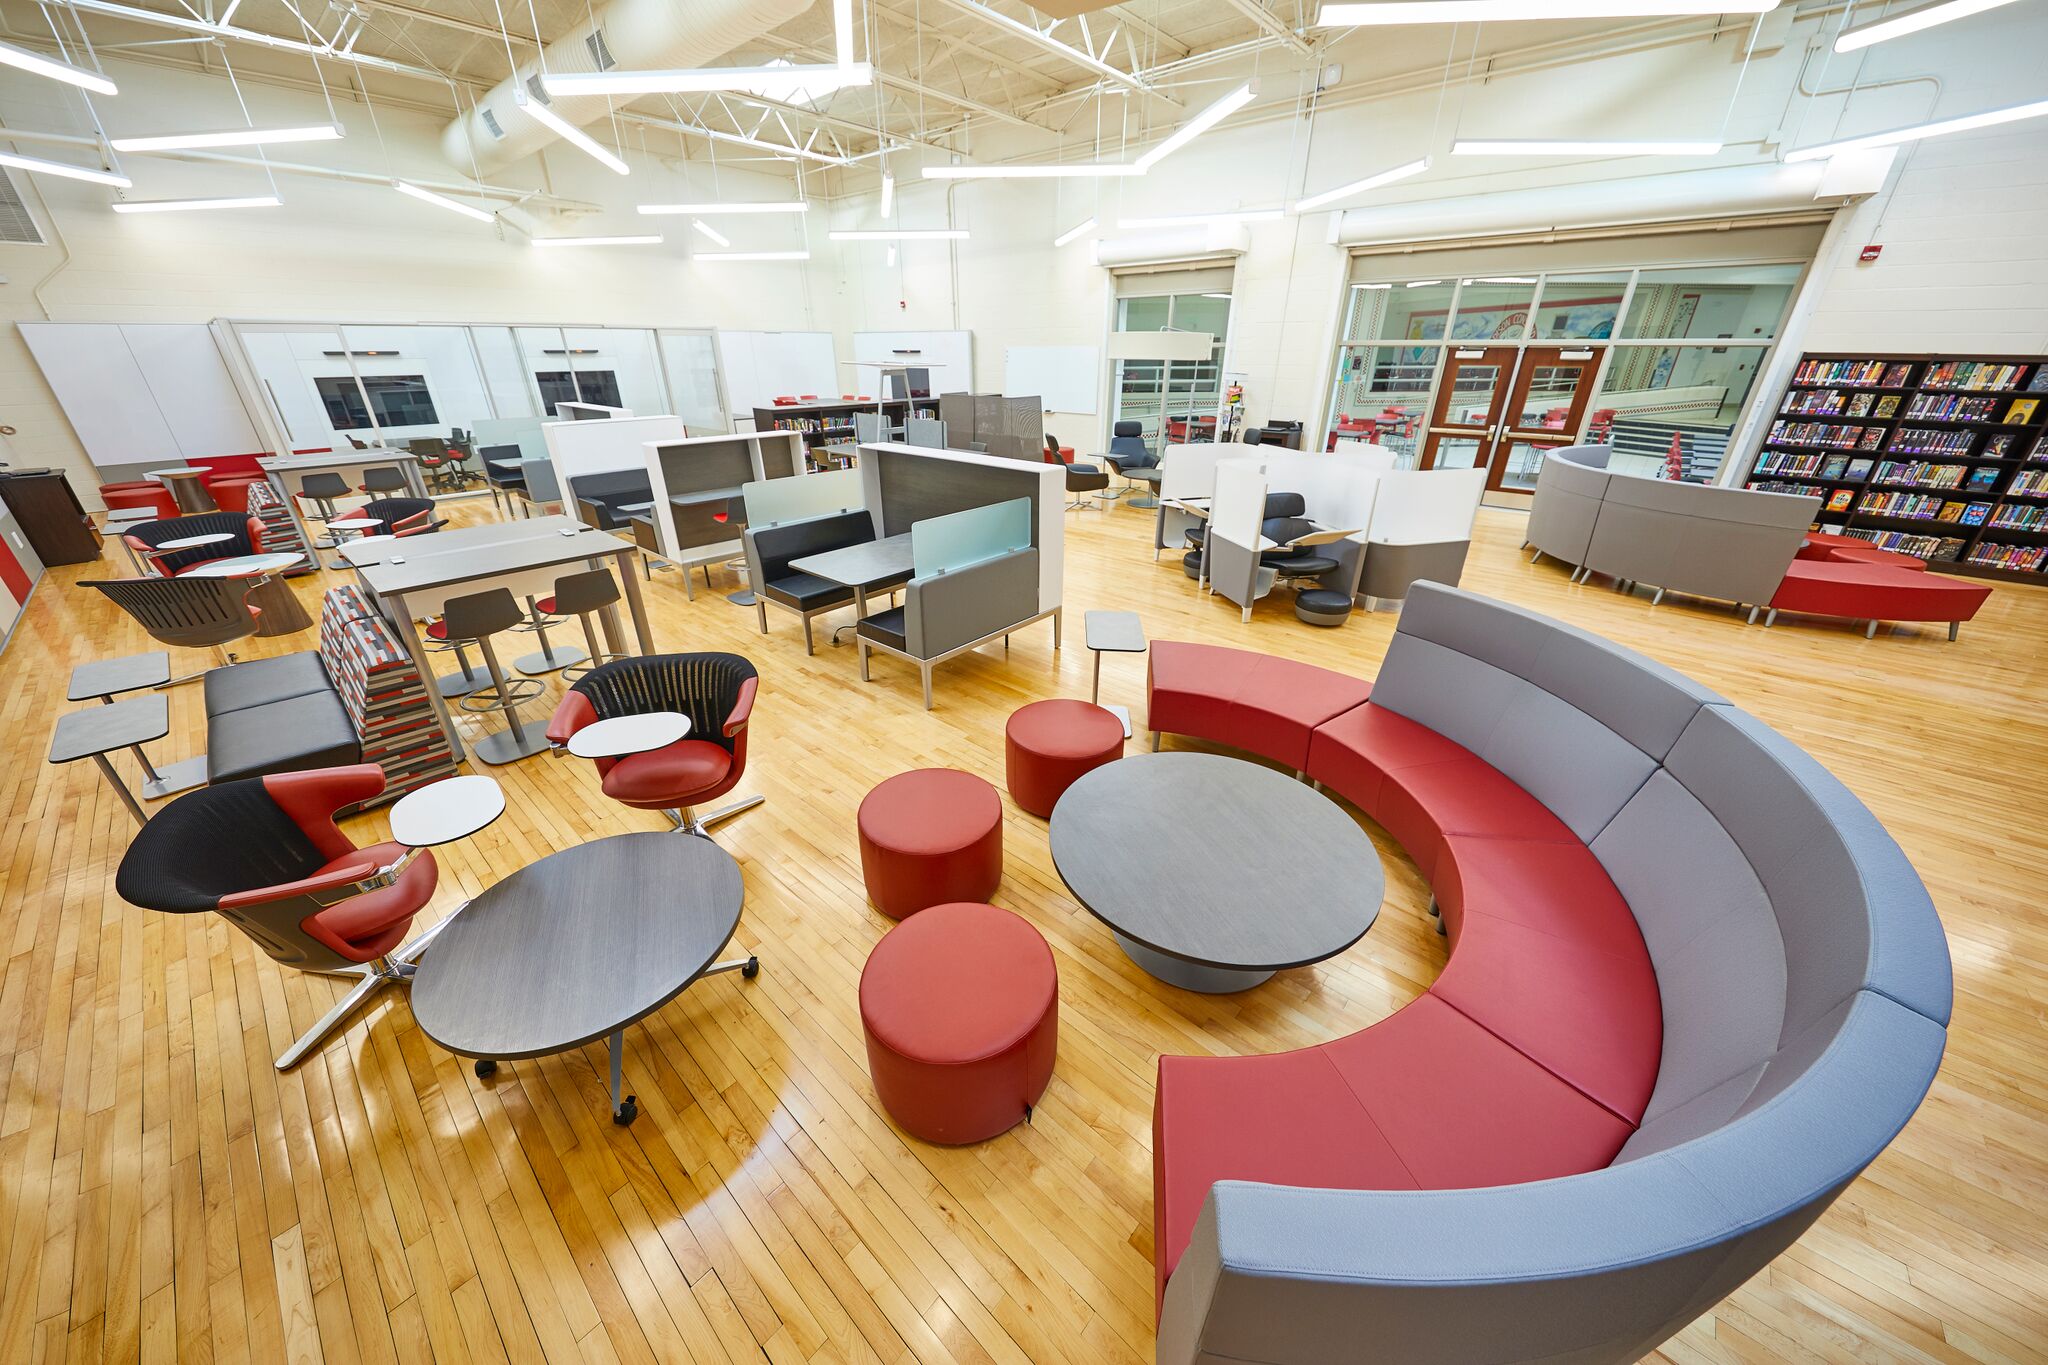 Image of Learning Commons